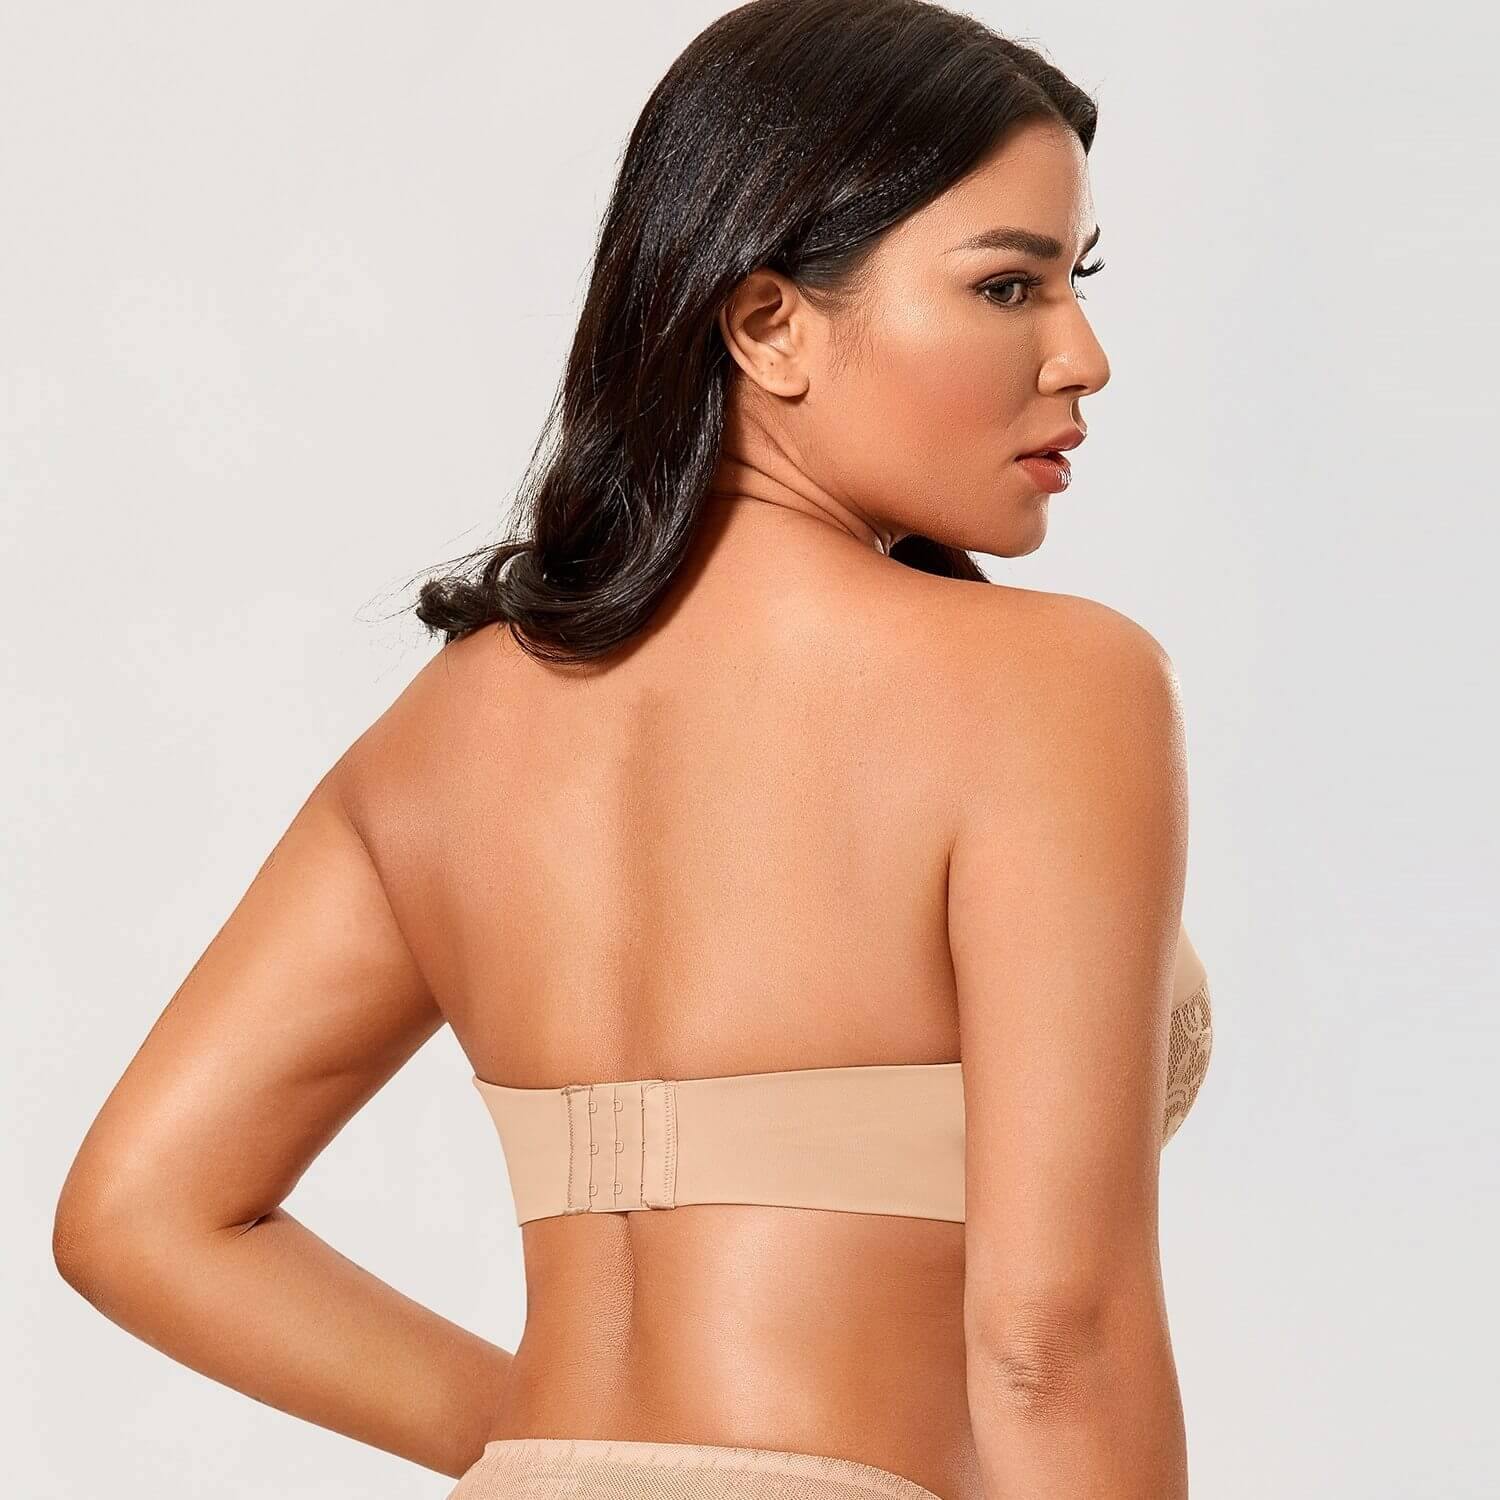 Plus Size Figure Types Backless, Seamless and Strapless Bras